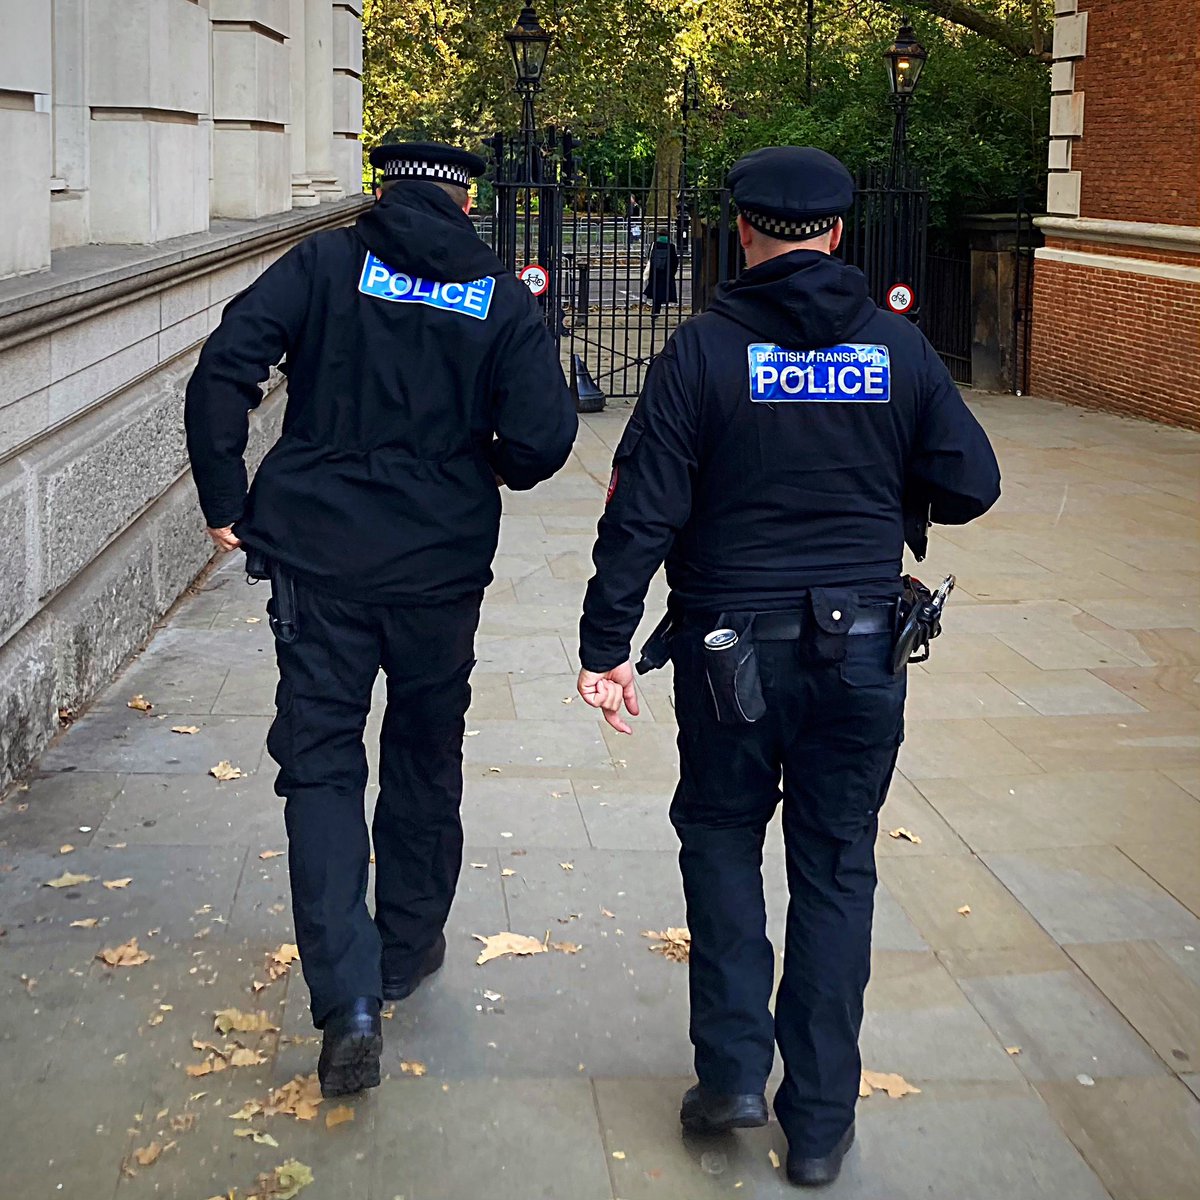 Two Robbers locked up by #BTPOSU #London officers from Surrey. Uniformed and Plain clothed Officers surprised the suspects and arrested them both. They are at the local custody suite now. #SeeItSayItSorted